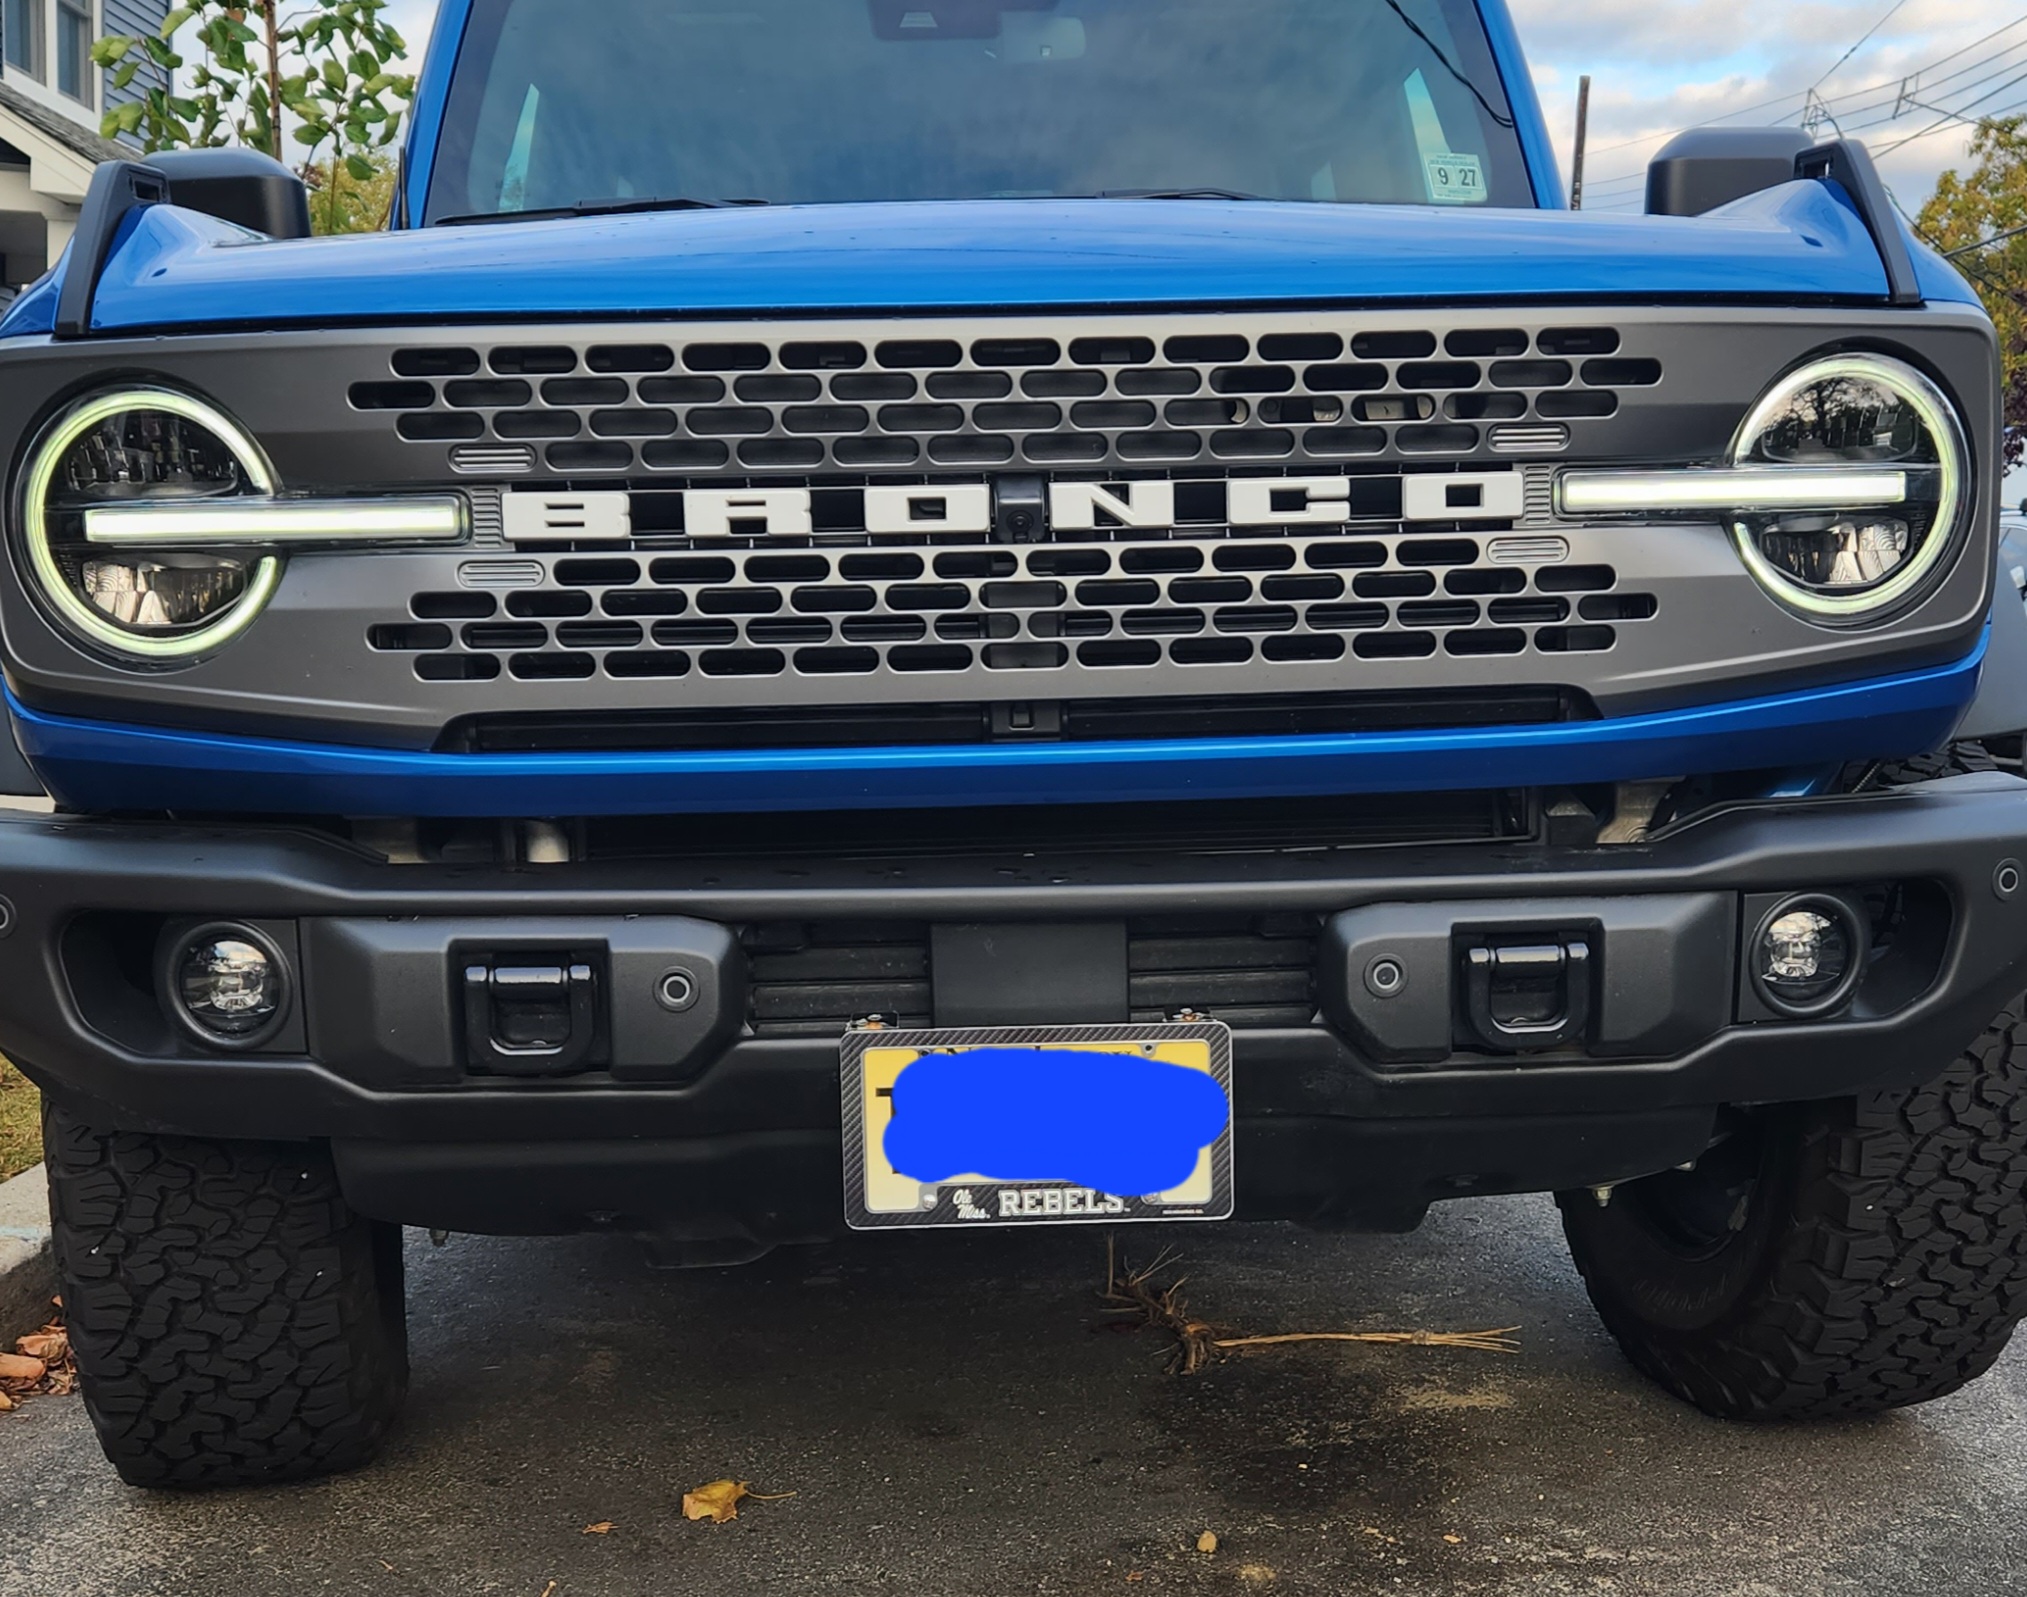 Ford Bronco Capable steel bumper license plate bracket (Heritage Bronco)- NO DRILLING required 20221018_074847